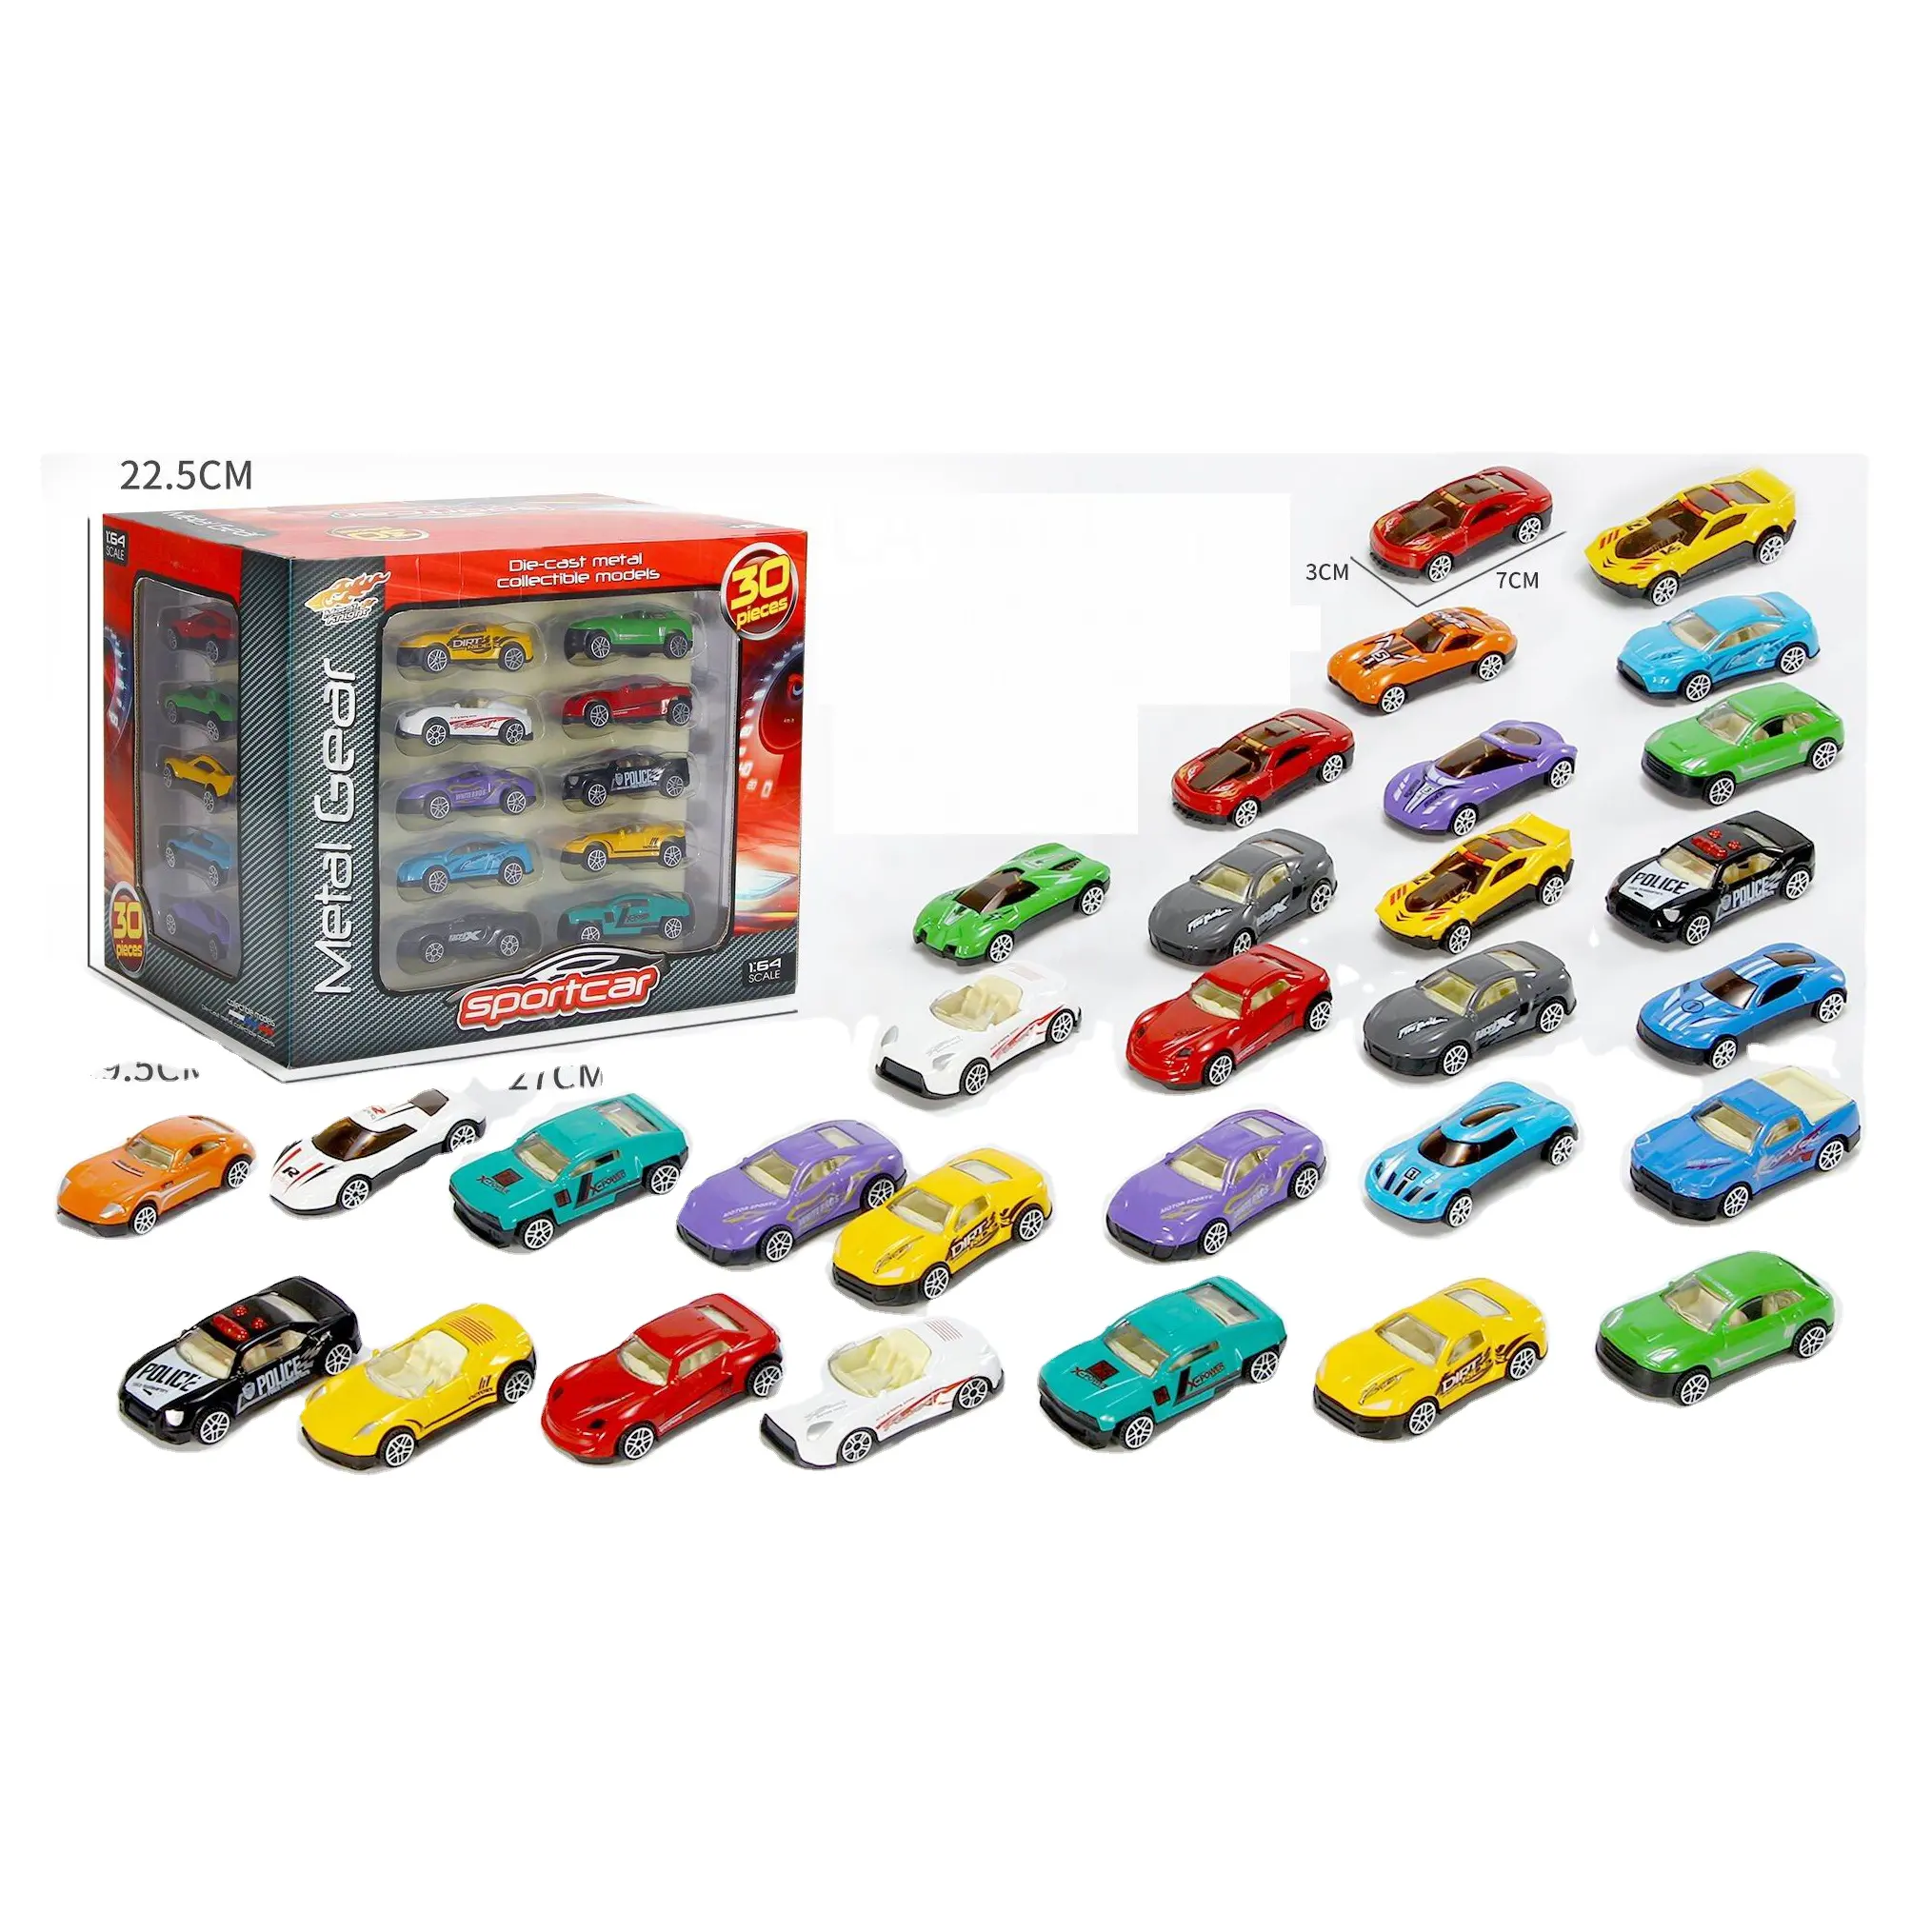 Metal Model Cars Die-cast Friction Sale collectible models Diecast Toys